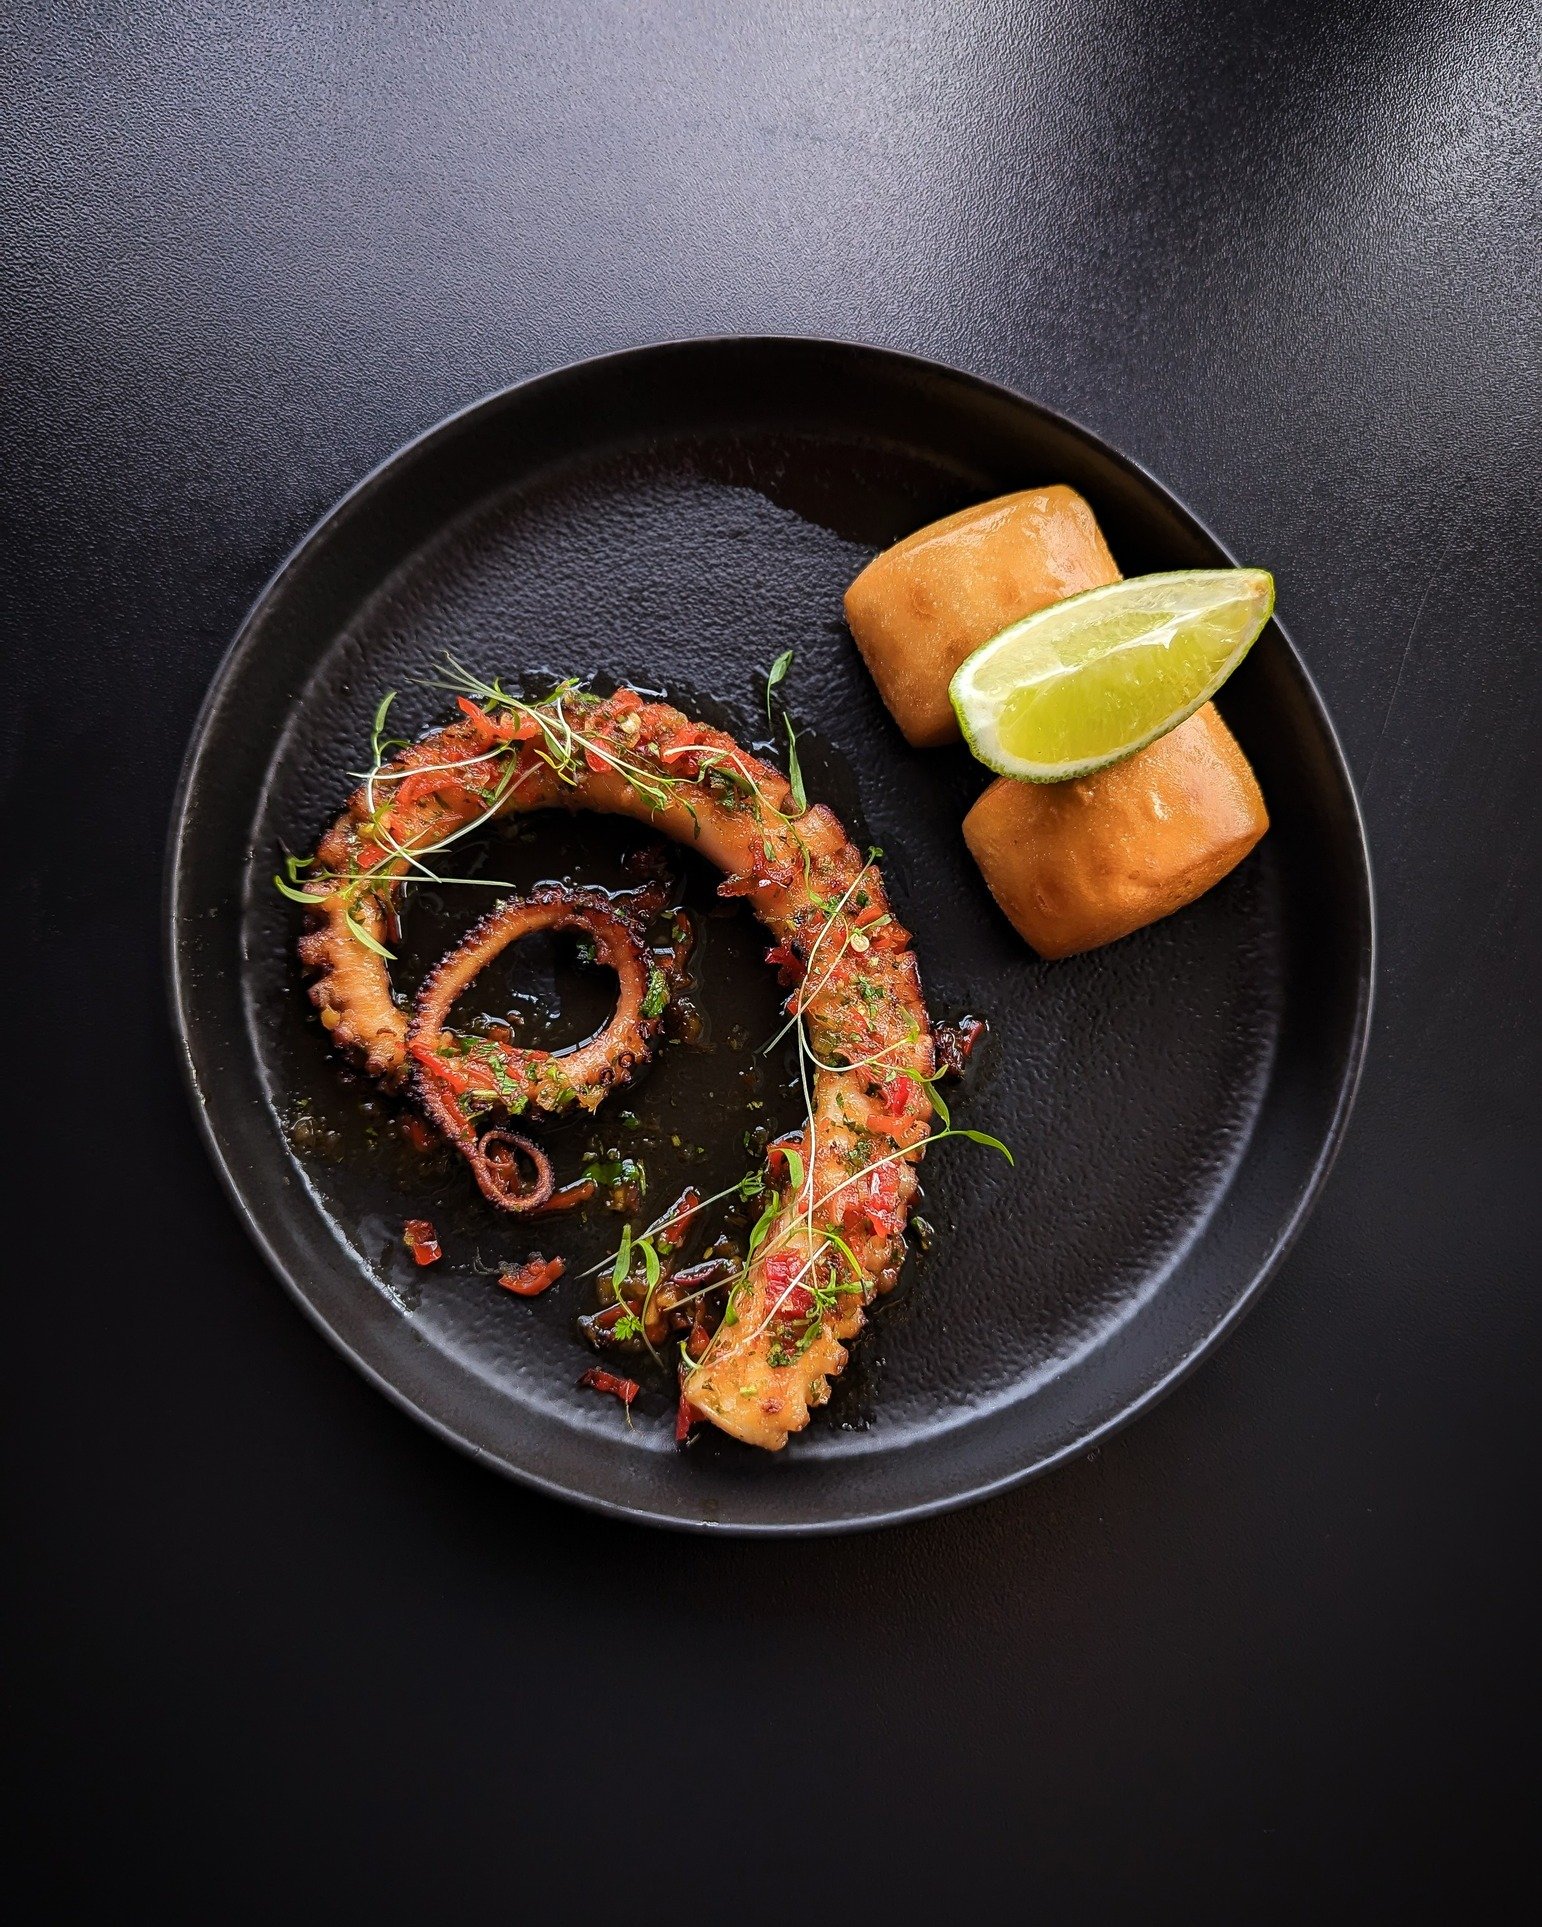 New Tasmanian Cray Pot Octopus special has launched at Pearl!
With xo chilli jam and crispy bao buns + lime, this one is not to be missed,
.
#PearlAndCoHobart #hobartfoodies #hobarteats #hobartrestaurant #seafoodrestaurant #tasmanianseafood #tasmania